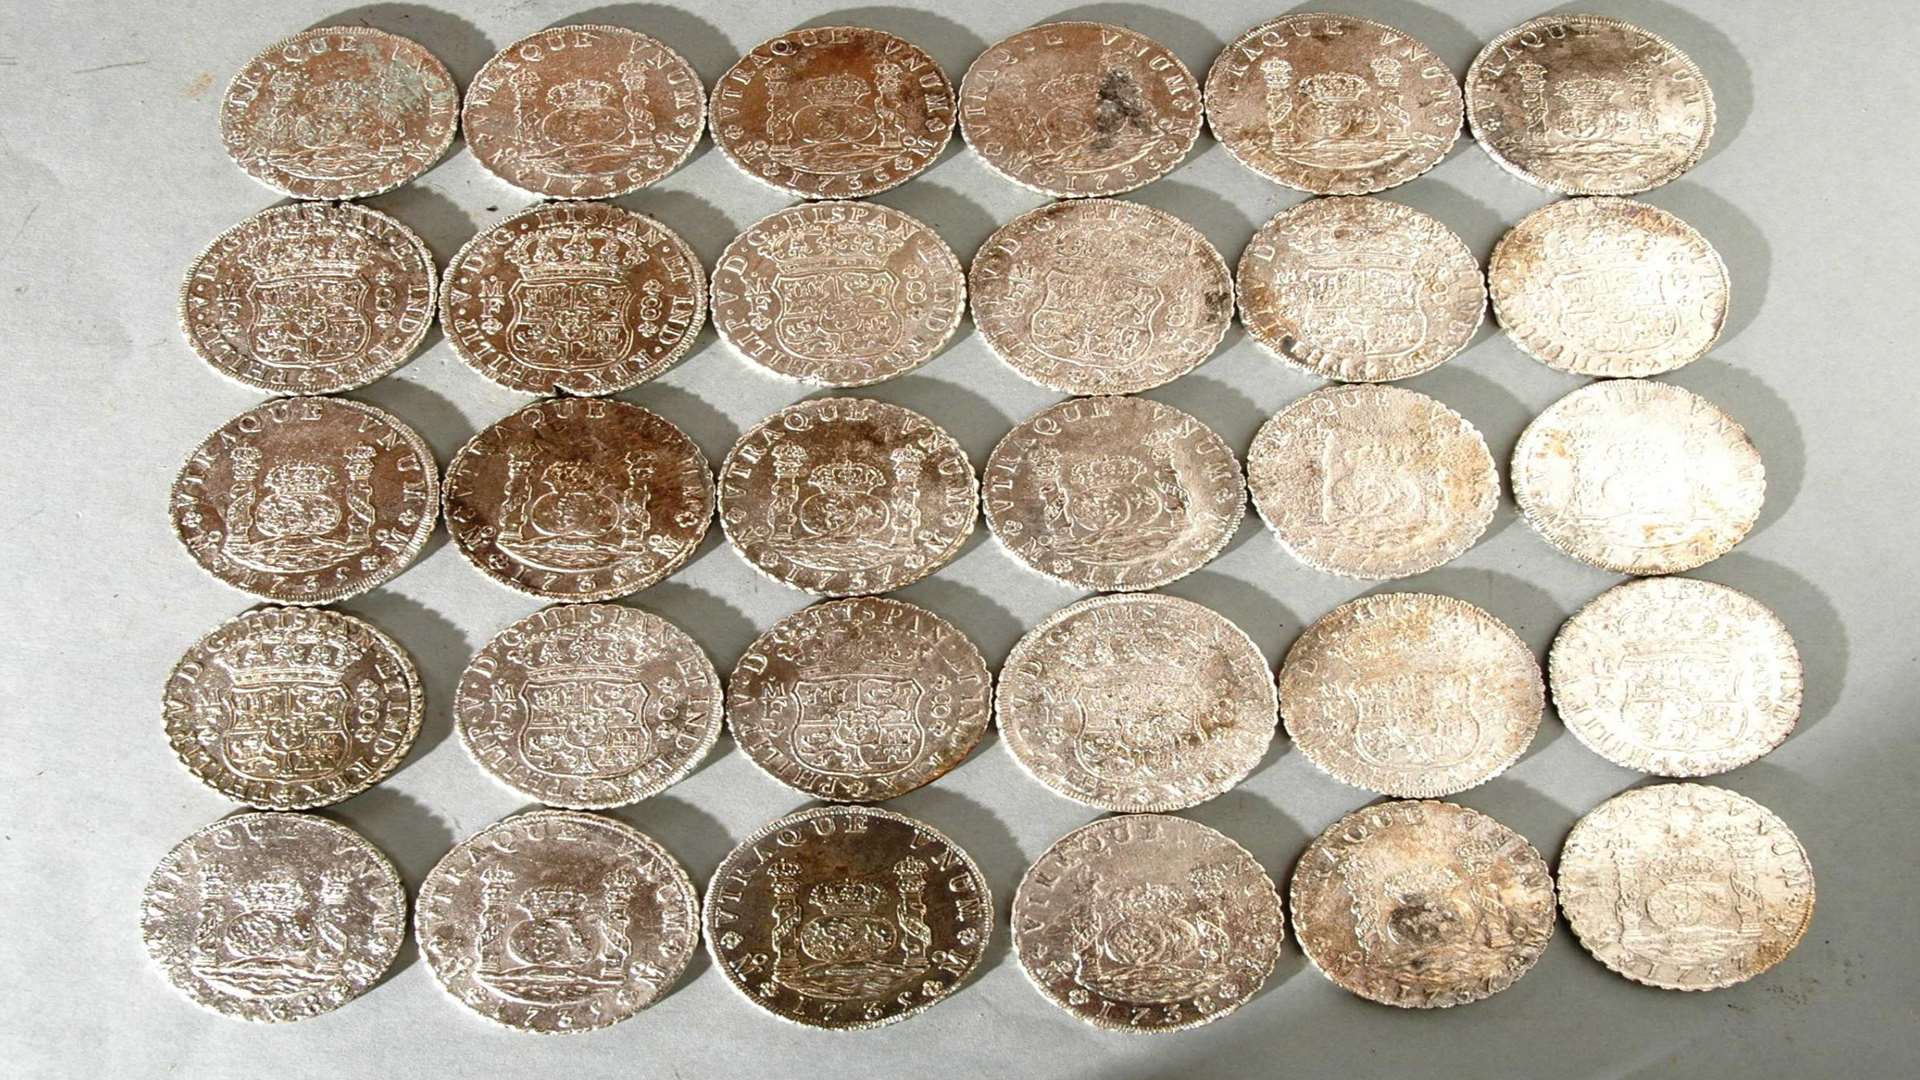 Spanish coins found in the Rooswijk wreck from 2005